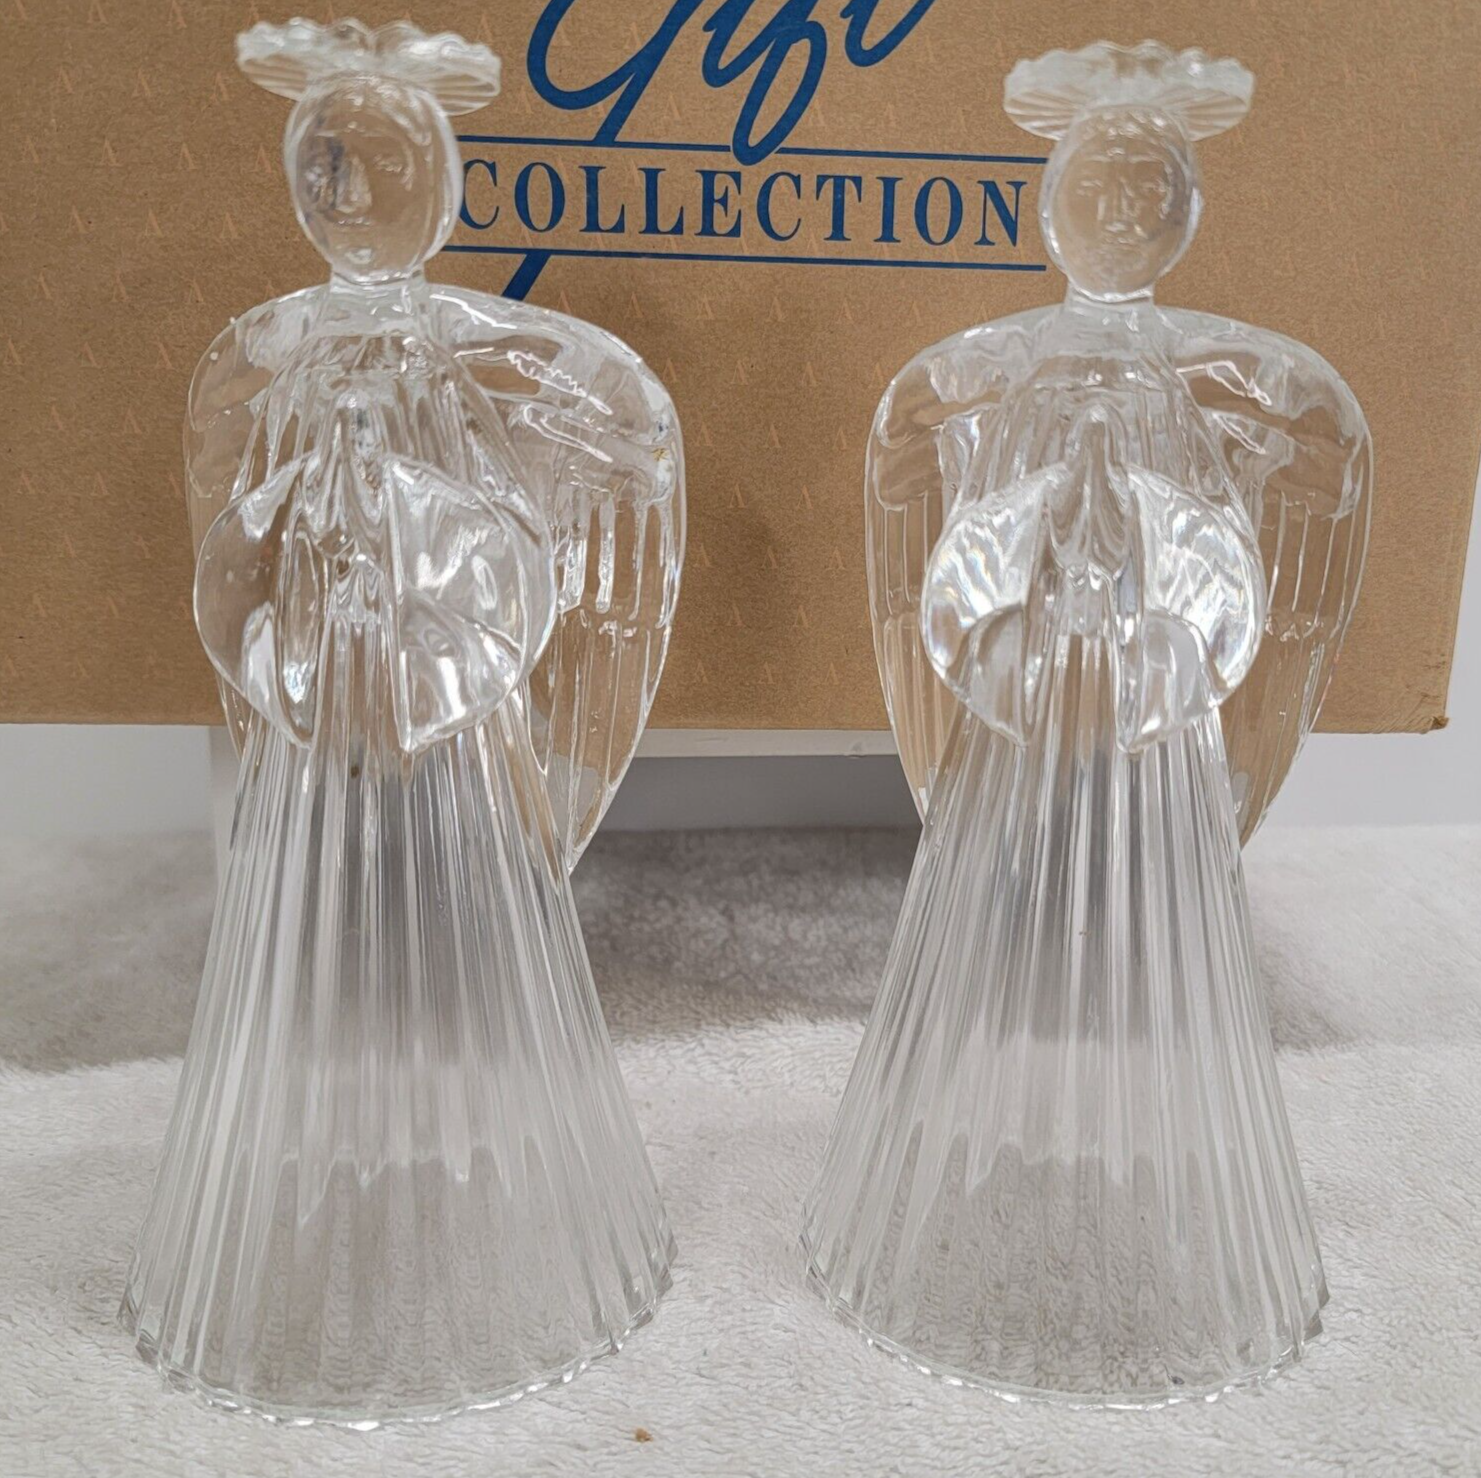 Vintage Avon Glowing Angel Crystal Candlesticks 1992 SET OF 2 WITH BOX 24% Lead - $12.22